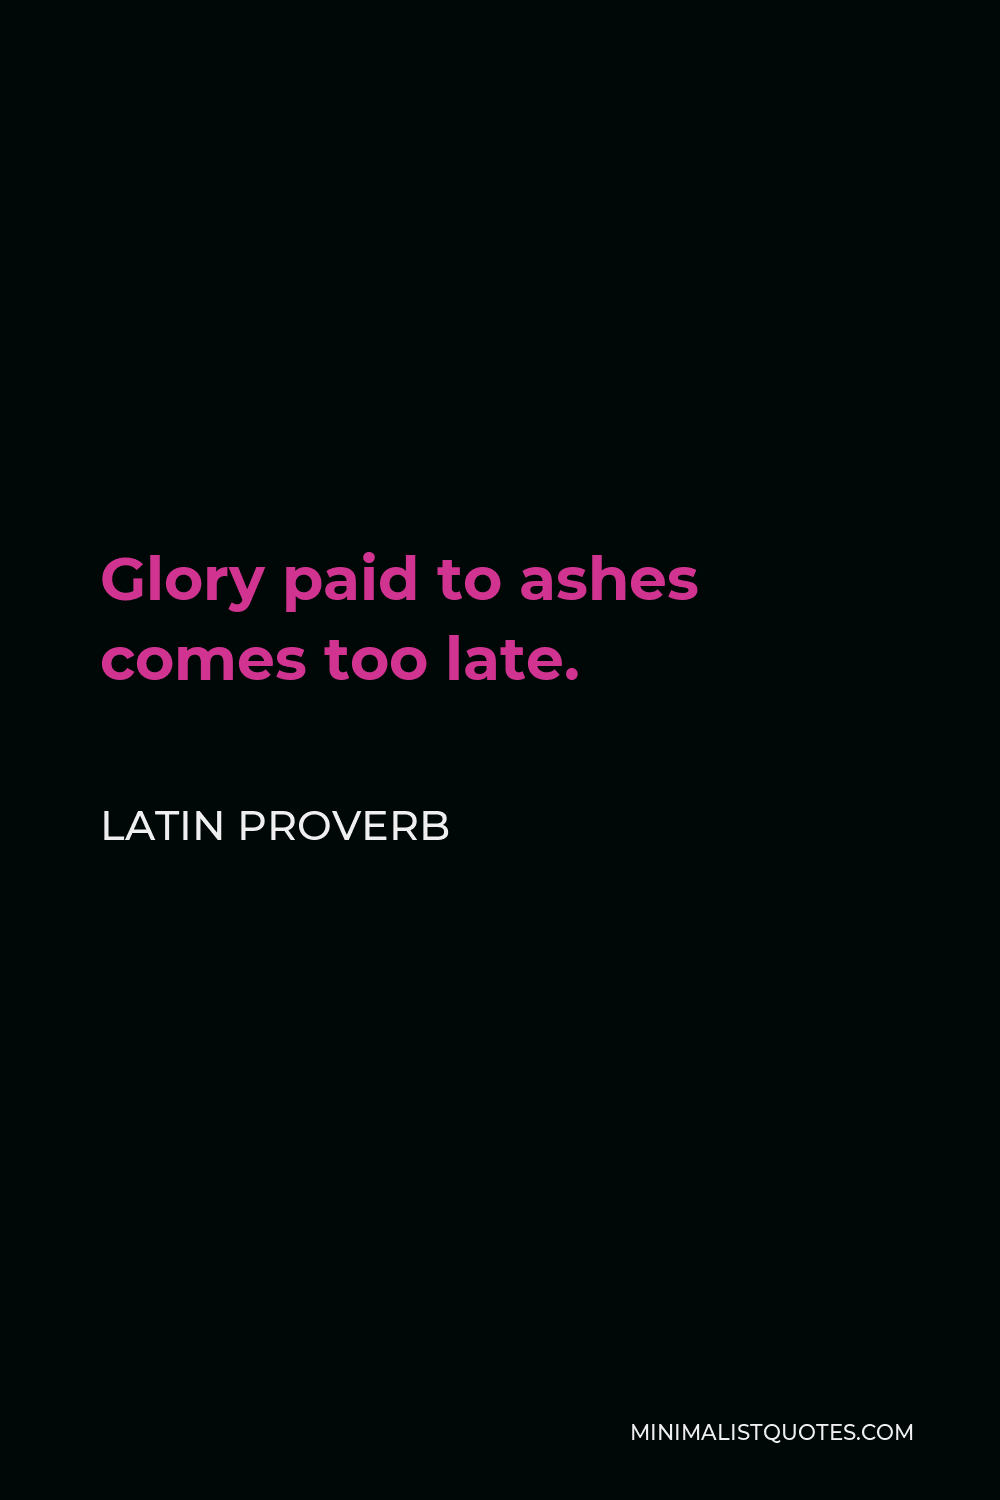 Latin Proverb Quote - Glory paid to ashes comes too late.